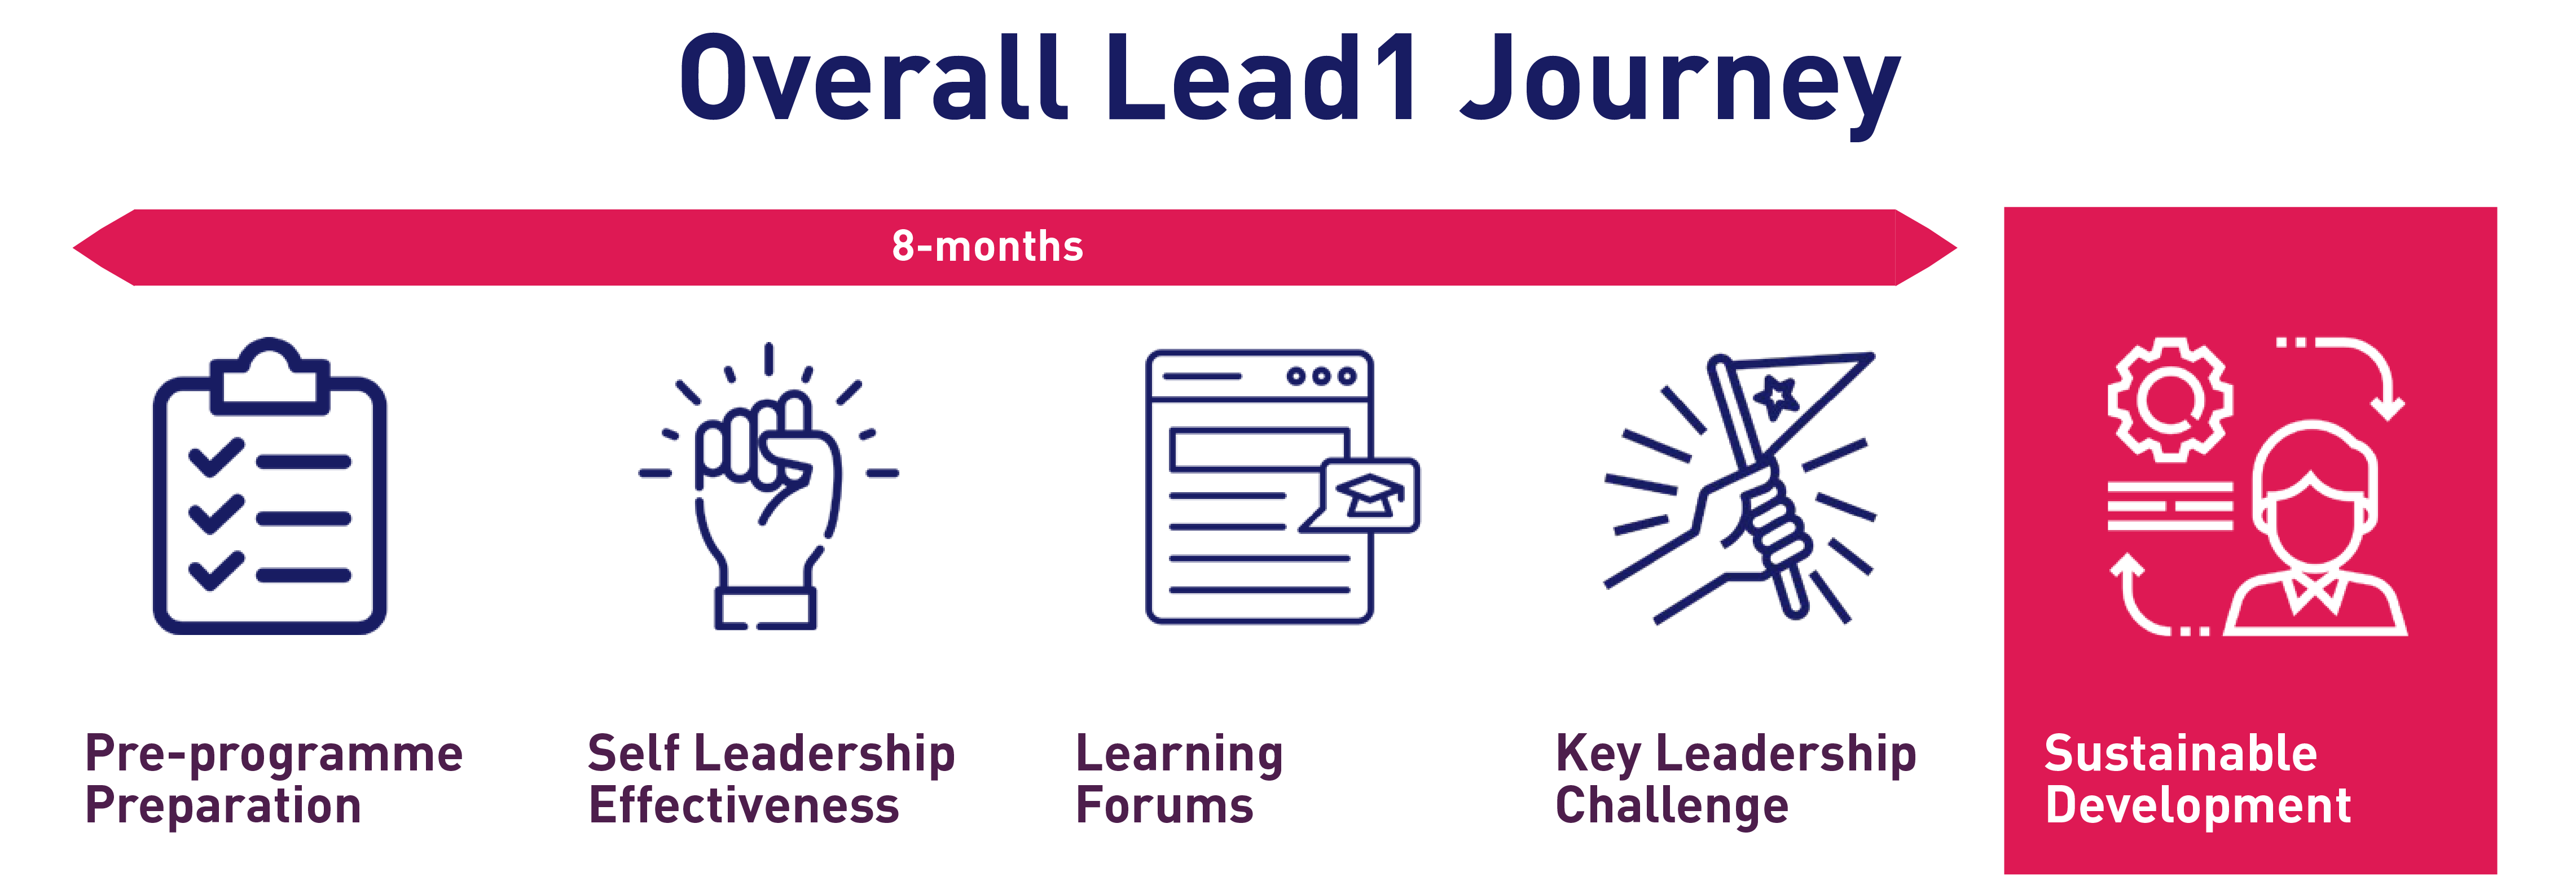 Overall Lead 1 Journey